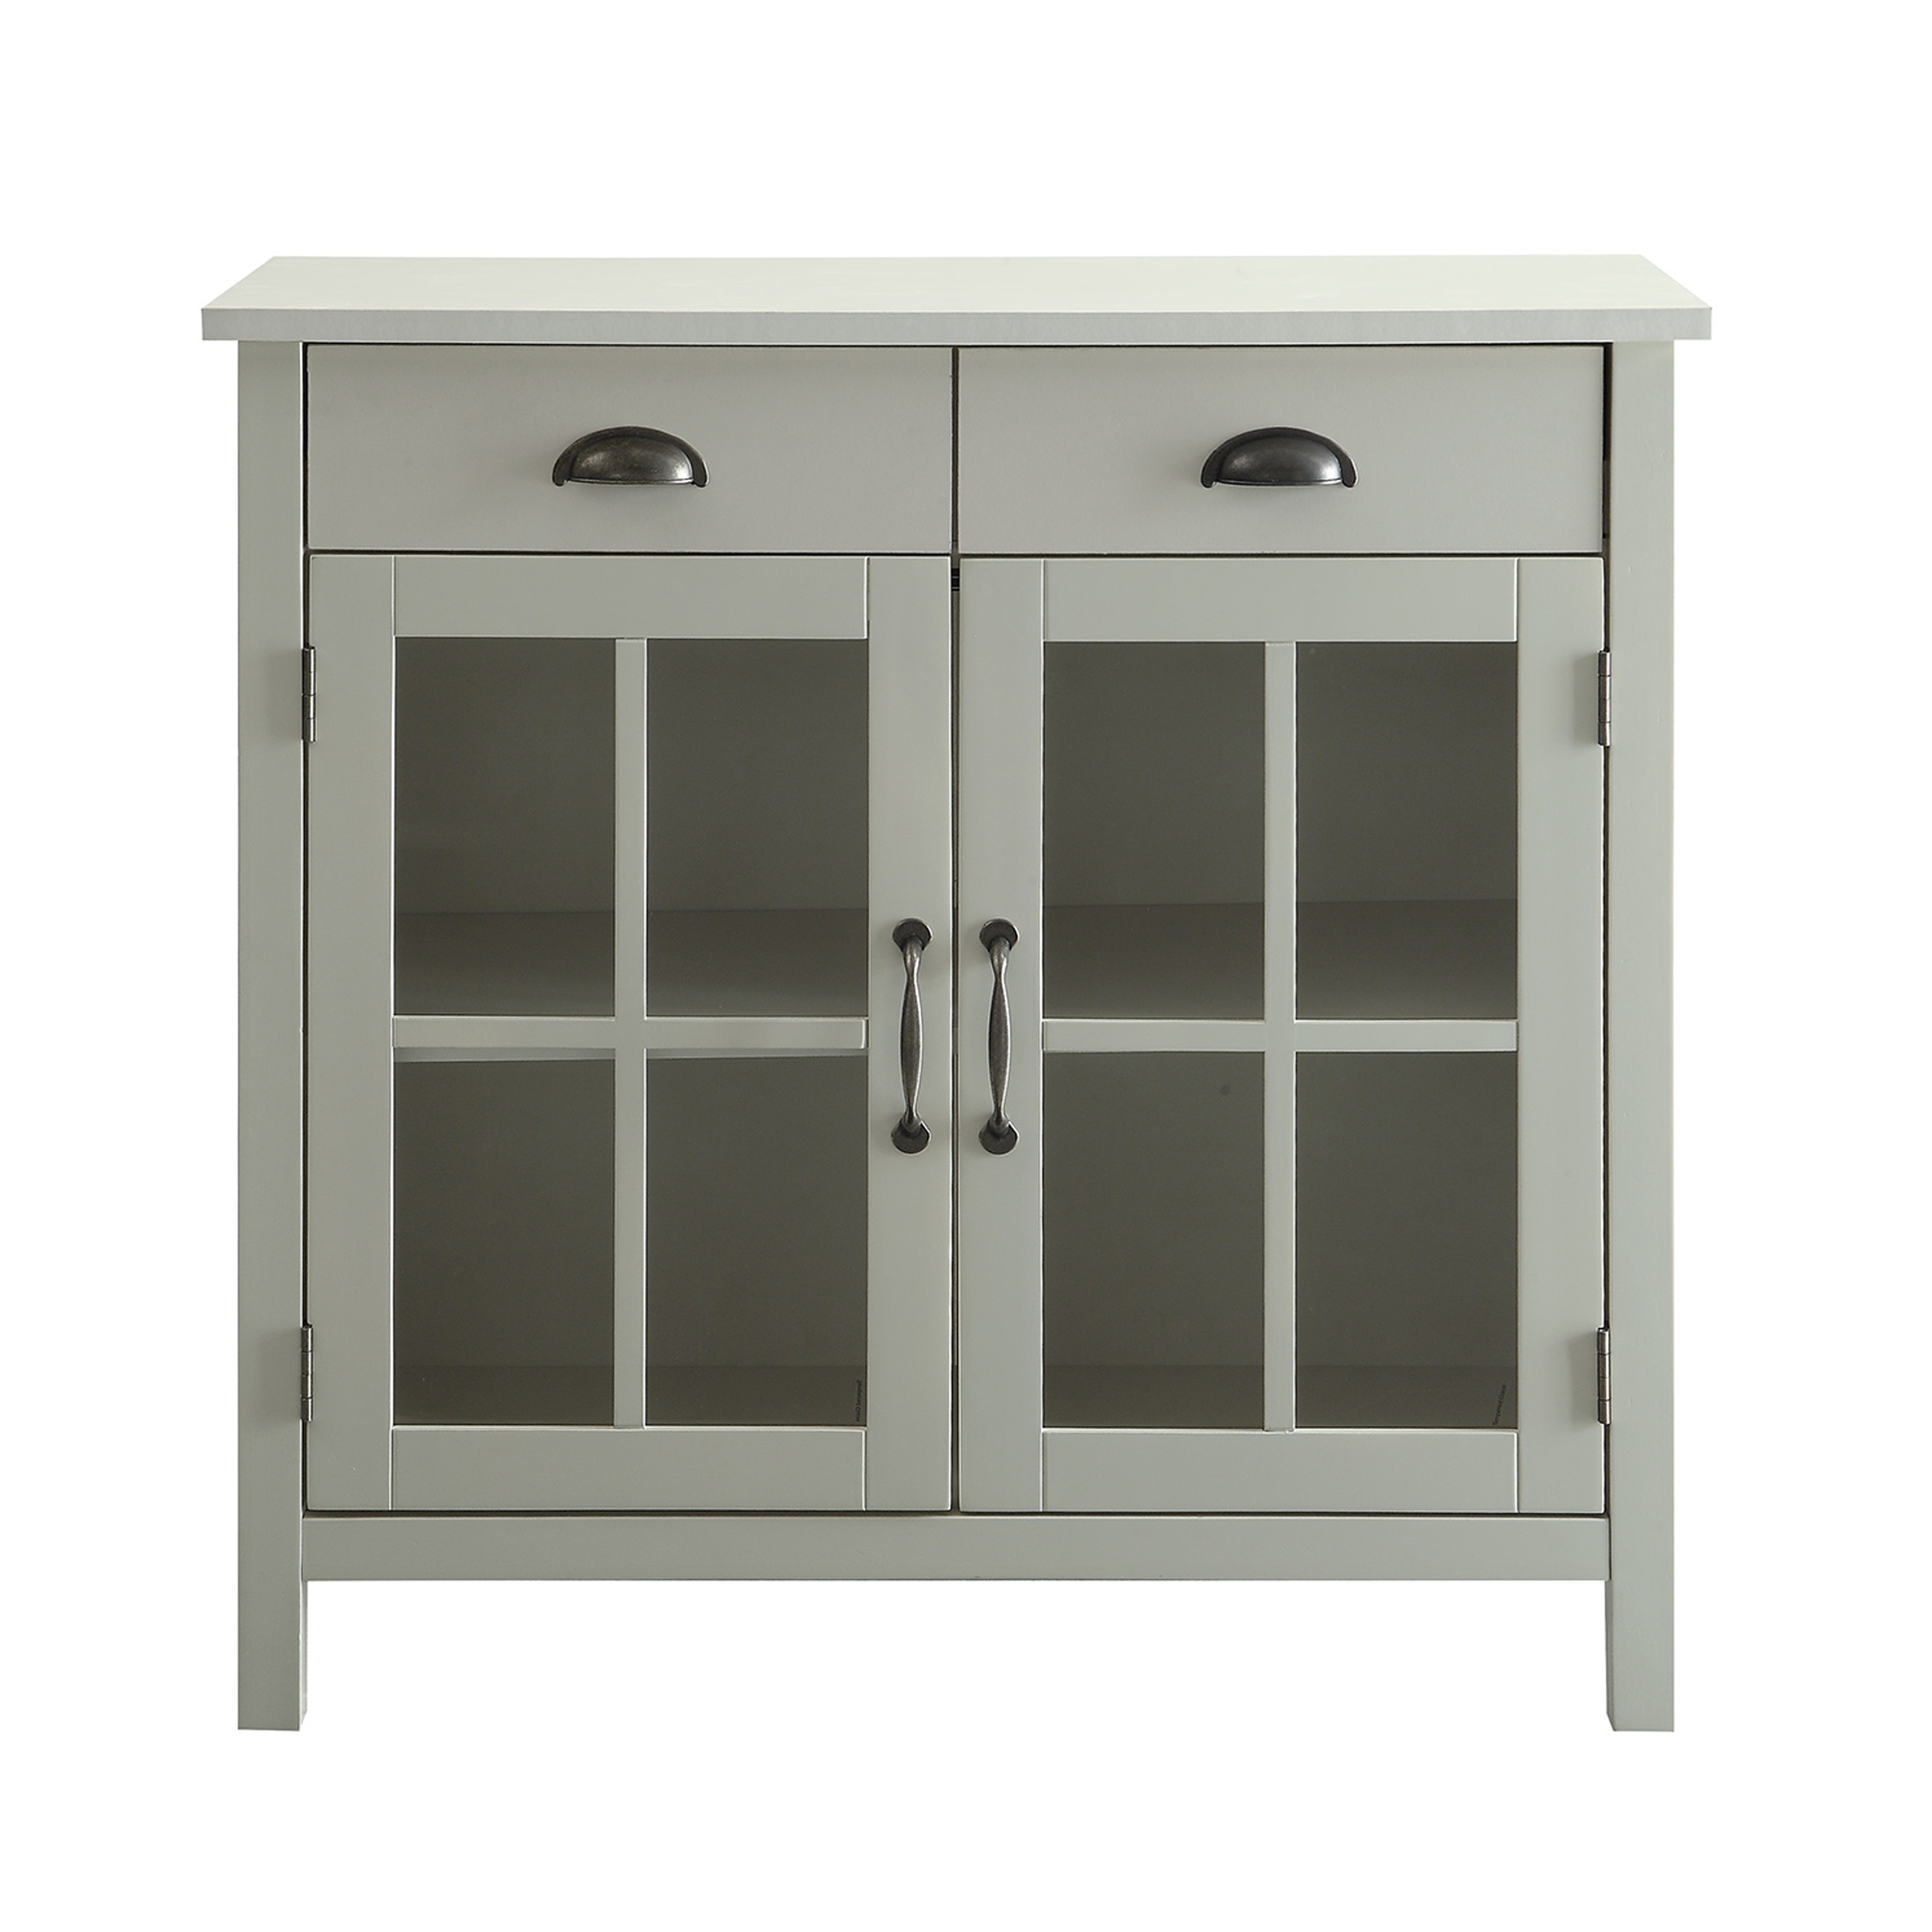 Accent Cabinet 2 Glass Doors + 2 Drawers Transitional Polar Off-white Wood Pine China Cabinet | - Belray Home Furnishings & Decor LBF19087D2-PWT